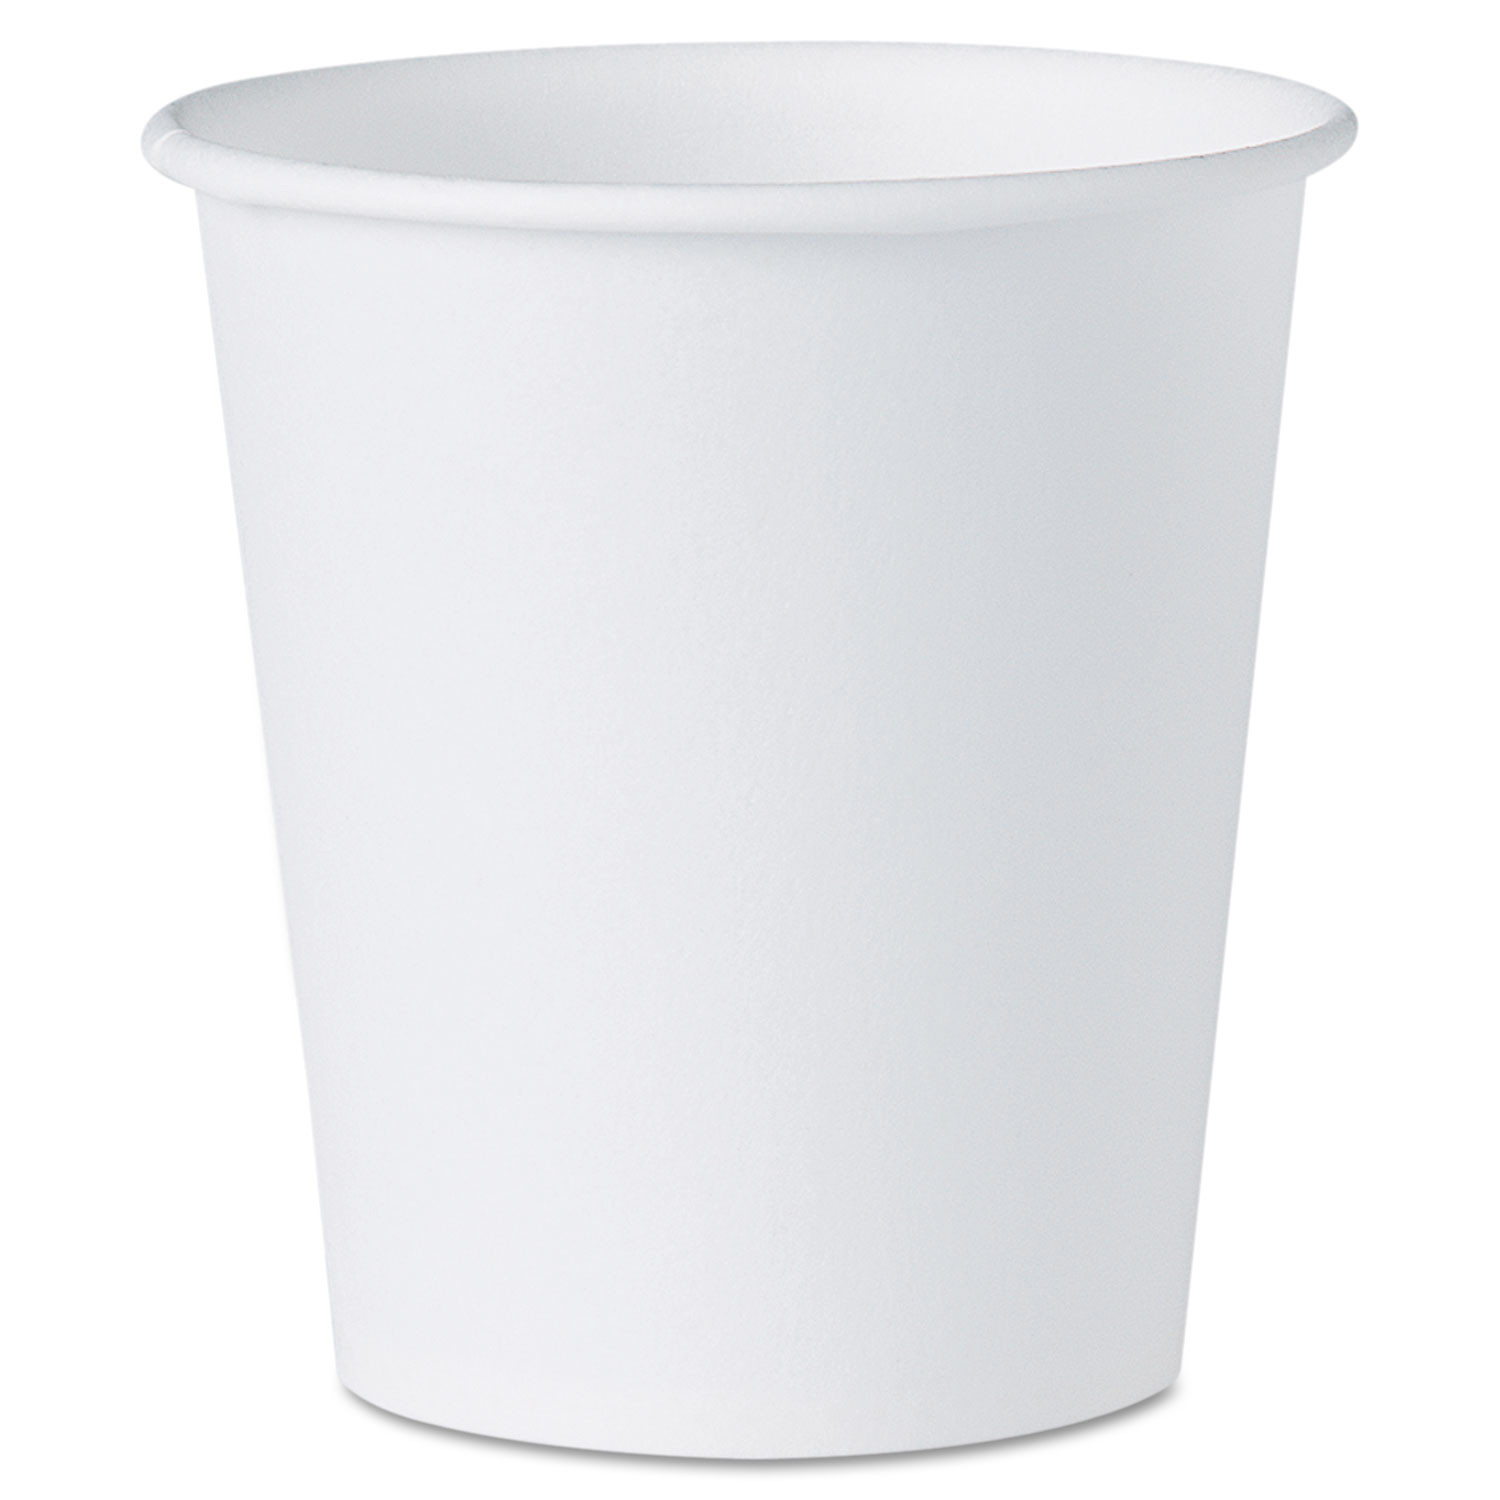  Solo 5T3-N0196 83 oz White Paper Bucket (Case of 100) : Health  & Household